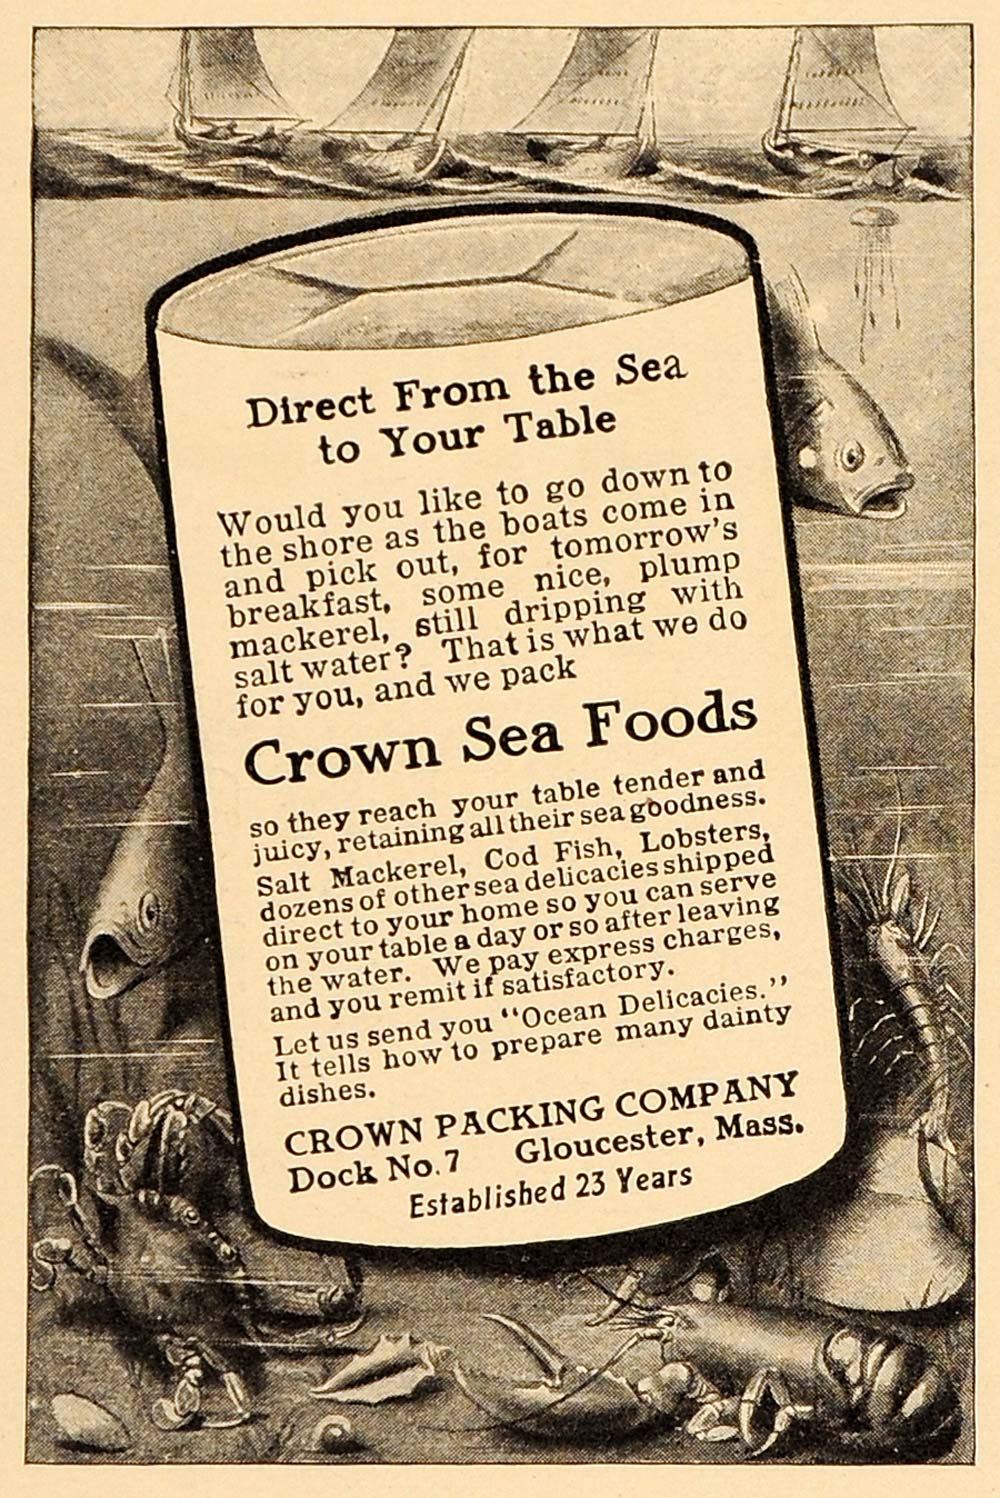 1911 Ad Crown Sea Food Canned Fish Dock 7 Gloucester MA - ORIGINAL OLD3A